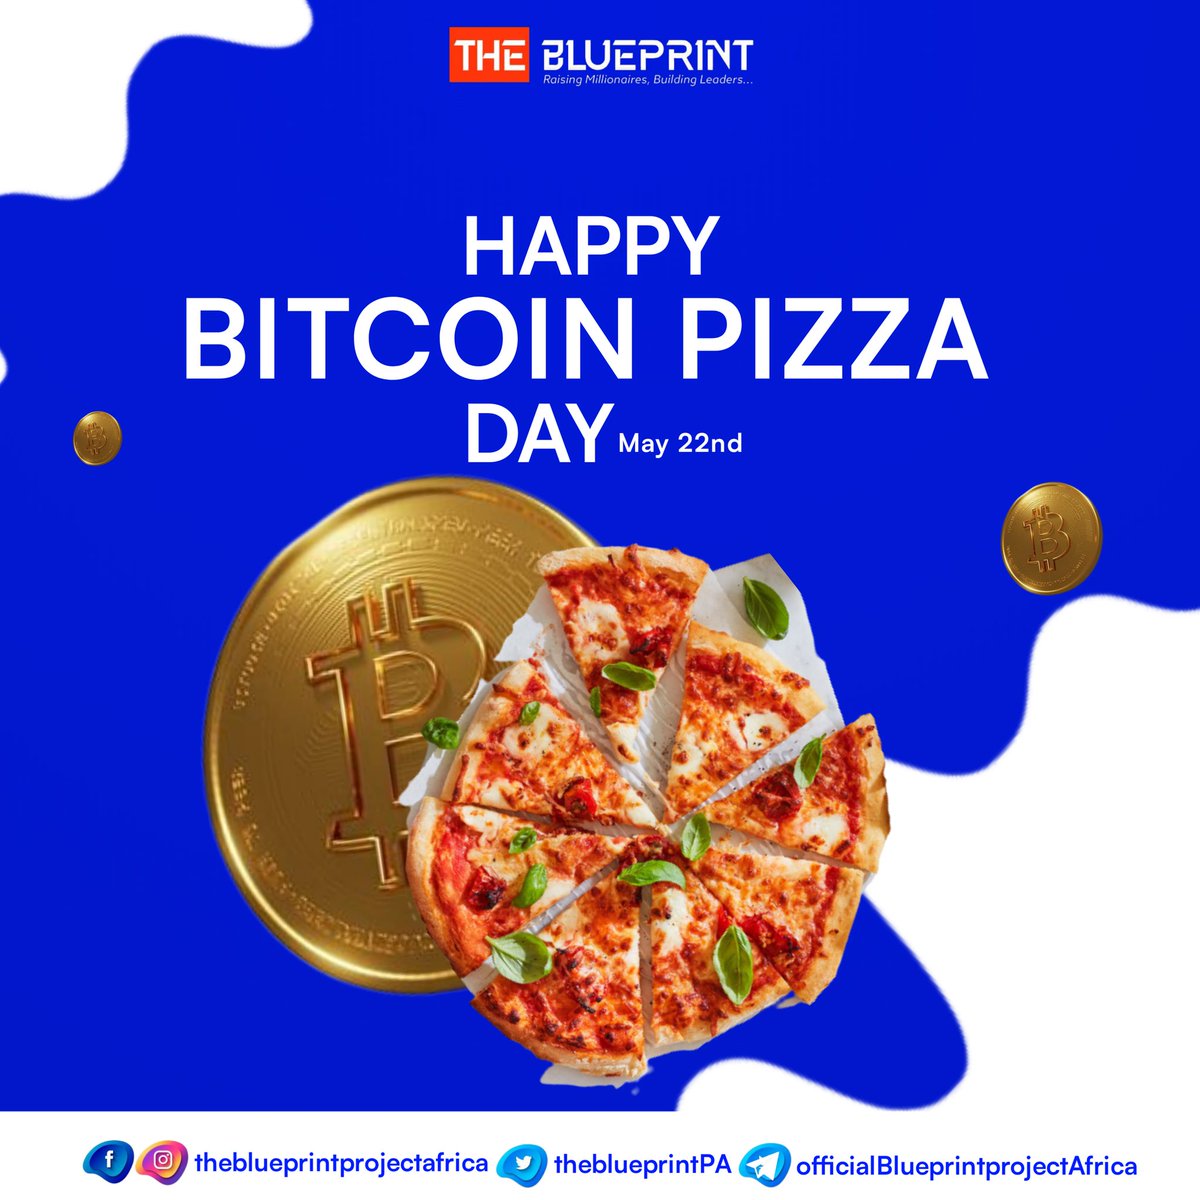 13 years ago, Laszlo Hanyecz, a Floridian programmer, bought 2 Papa John's pizzas valued today at $270M.
Let's celebrate this Era 💥✨💥
HAPPY #BitcoinPizzaDay2023 🍕🍕🍕🍕